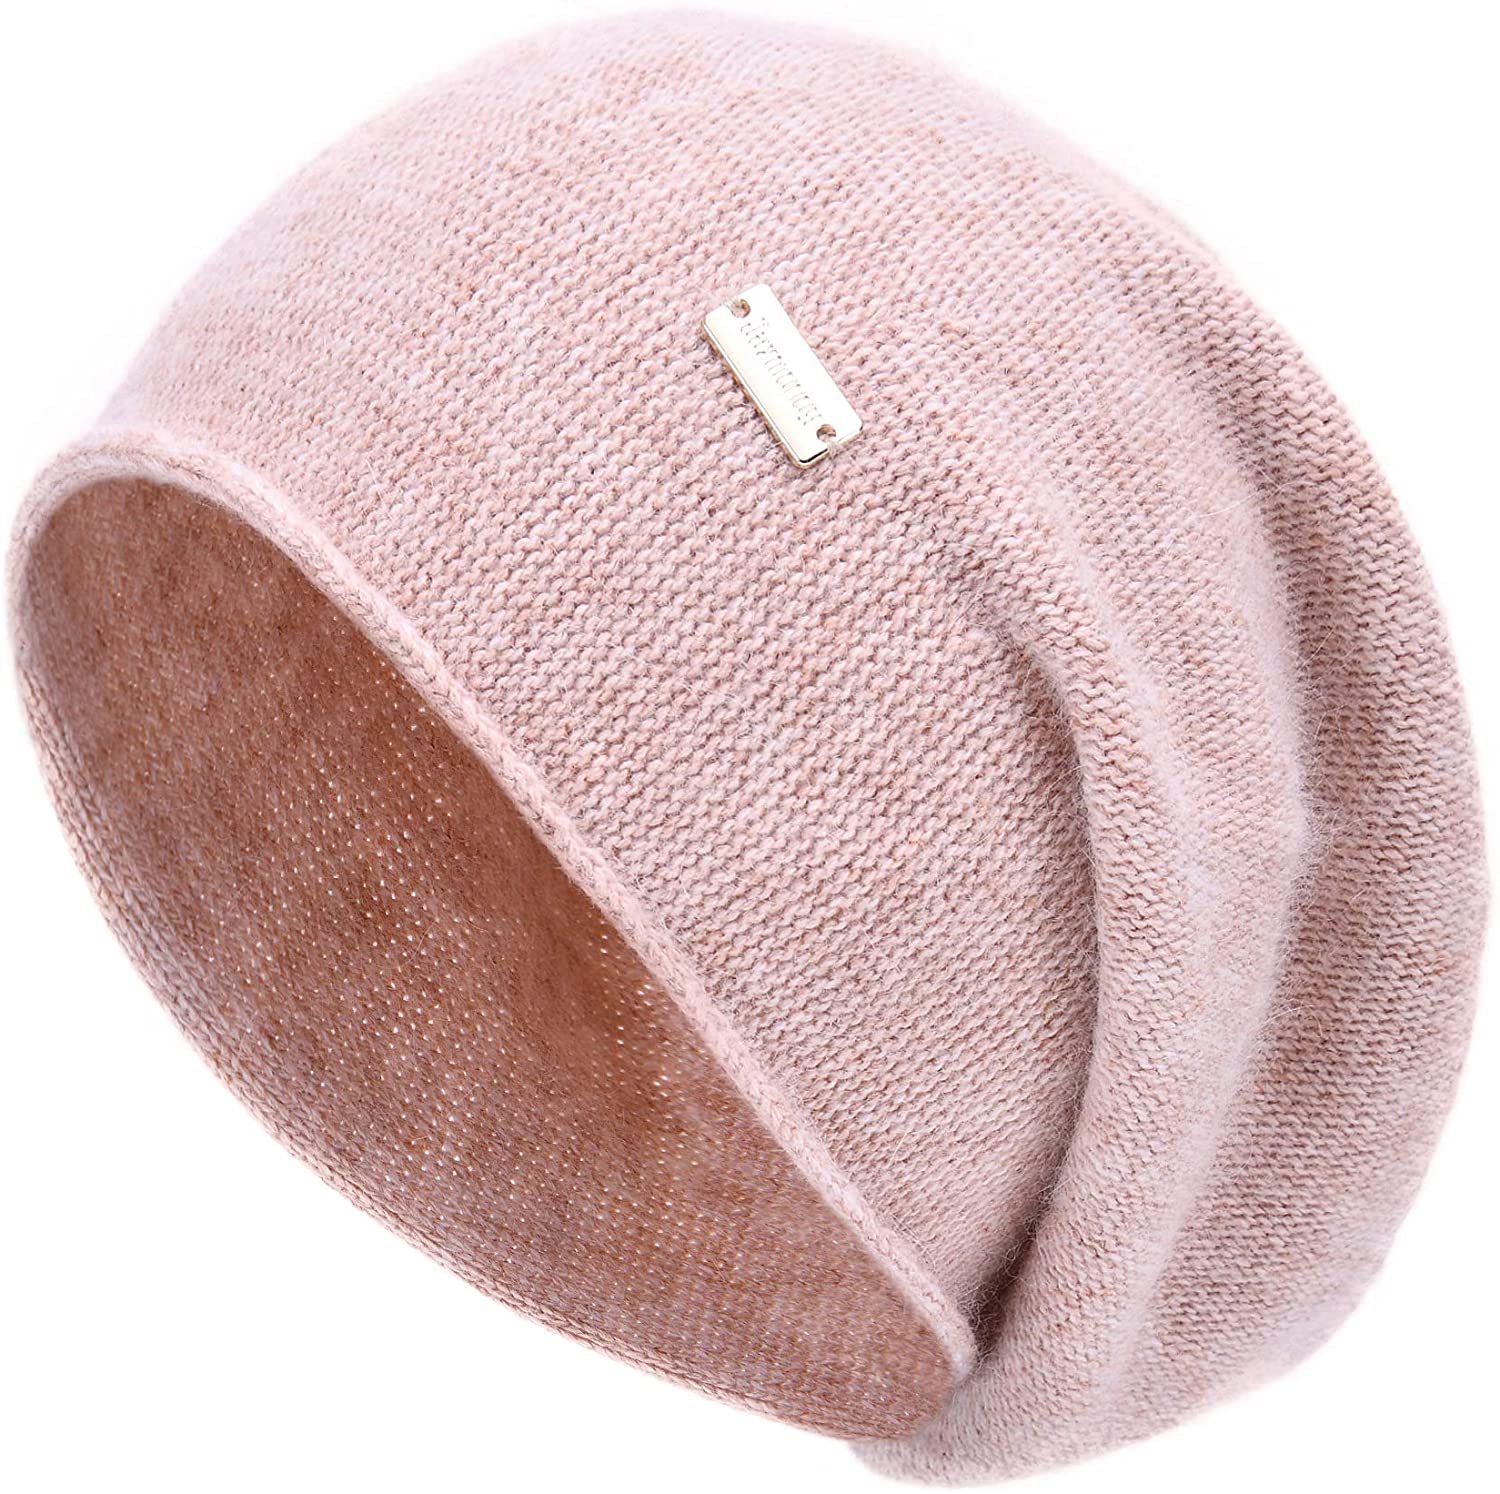 Feisette Womens Beanie Hats with Applique Winter Knitted Cashmere Pearl Slouchy Beanies Skullies Hats 